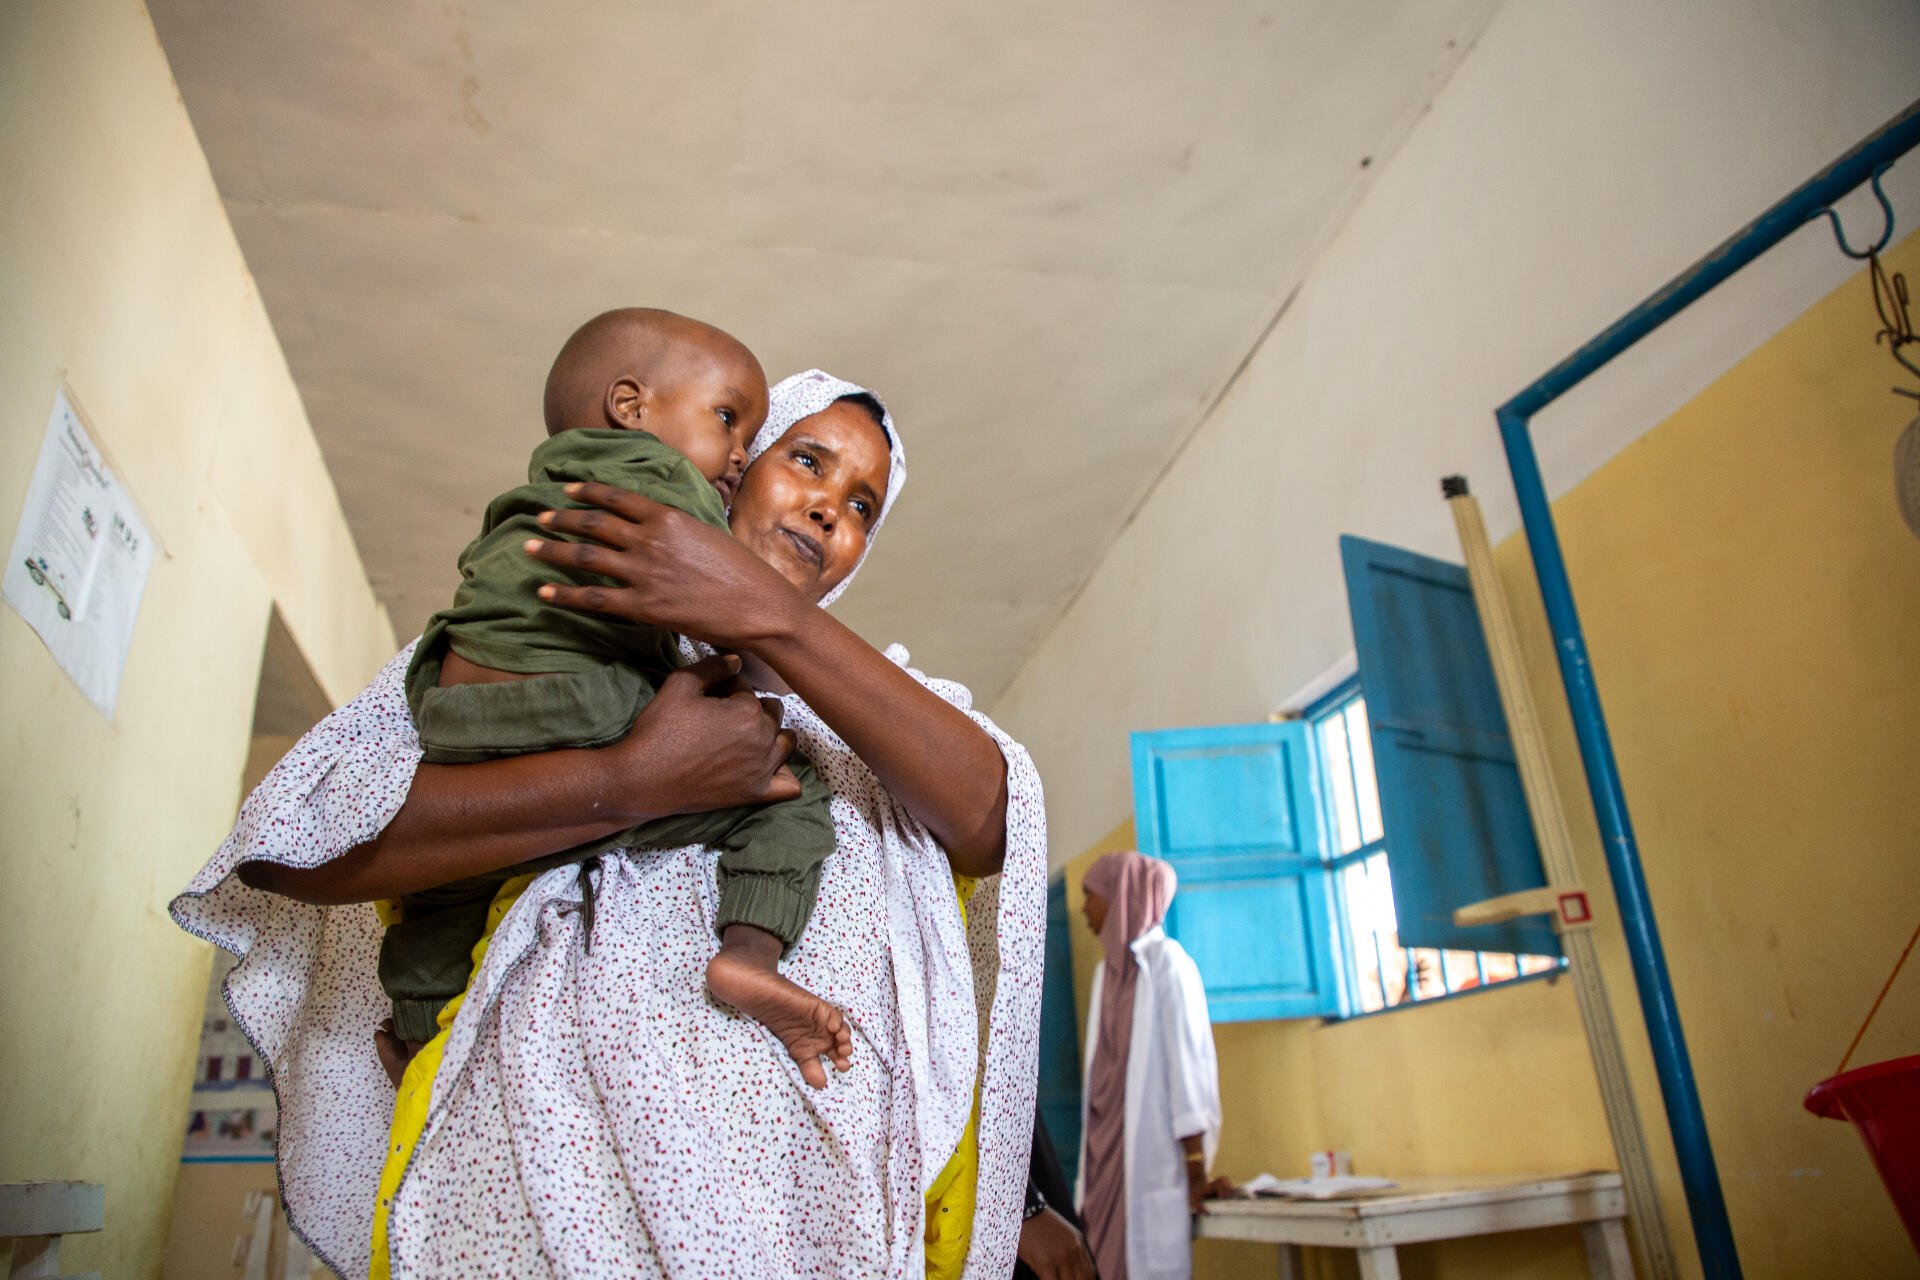 A mother holds her child close as the two walk through a malnutrition treatment ward in the Hanano Hospital in Somalia.